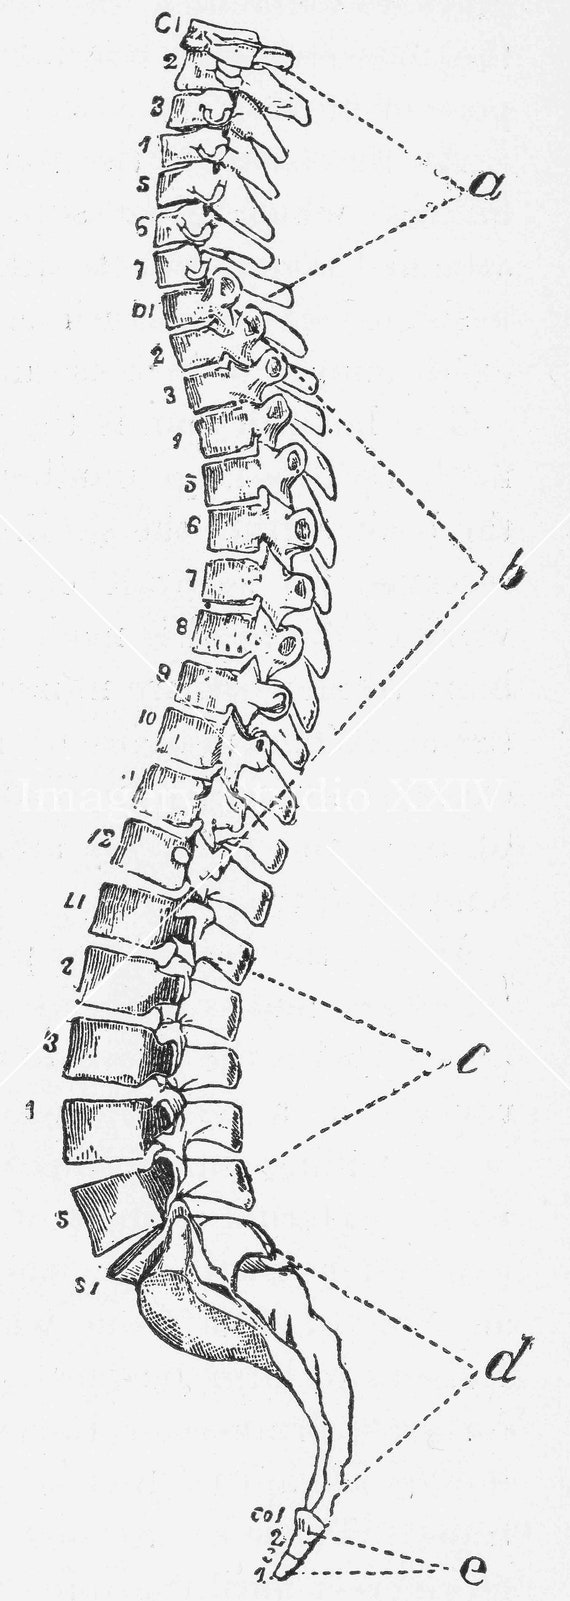 Vector sketch icon of human spine bones or joints Human spine bones and  backbone joints vector sketch body anatomy icon  CanStock